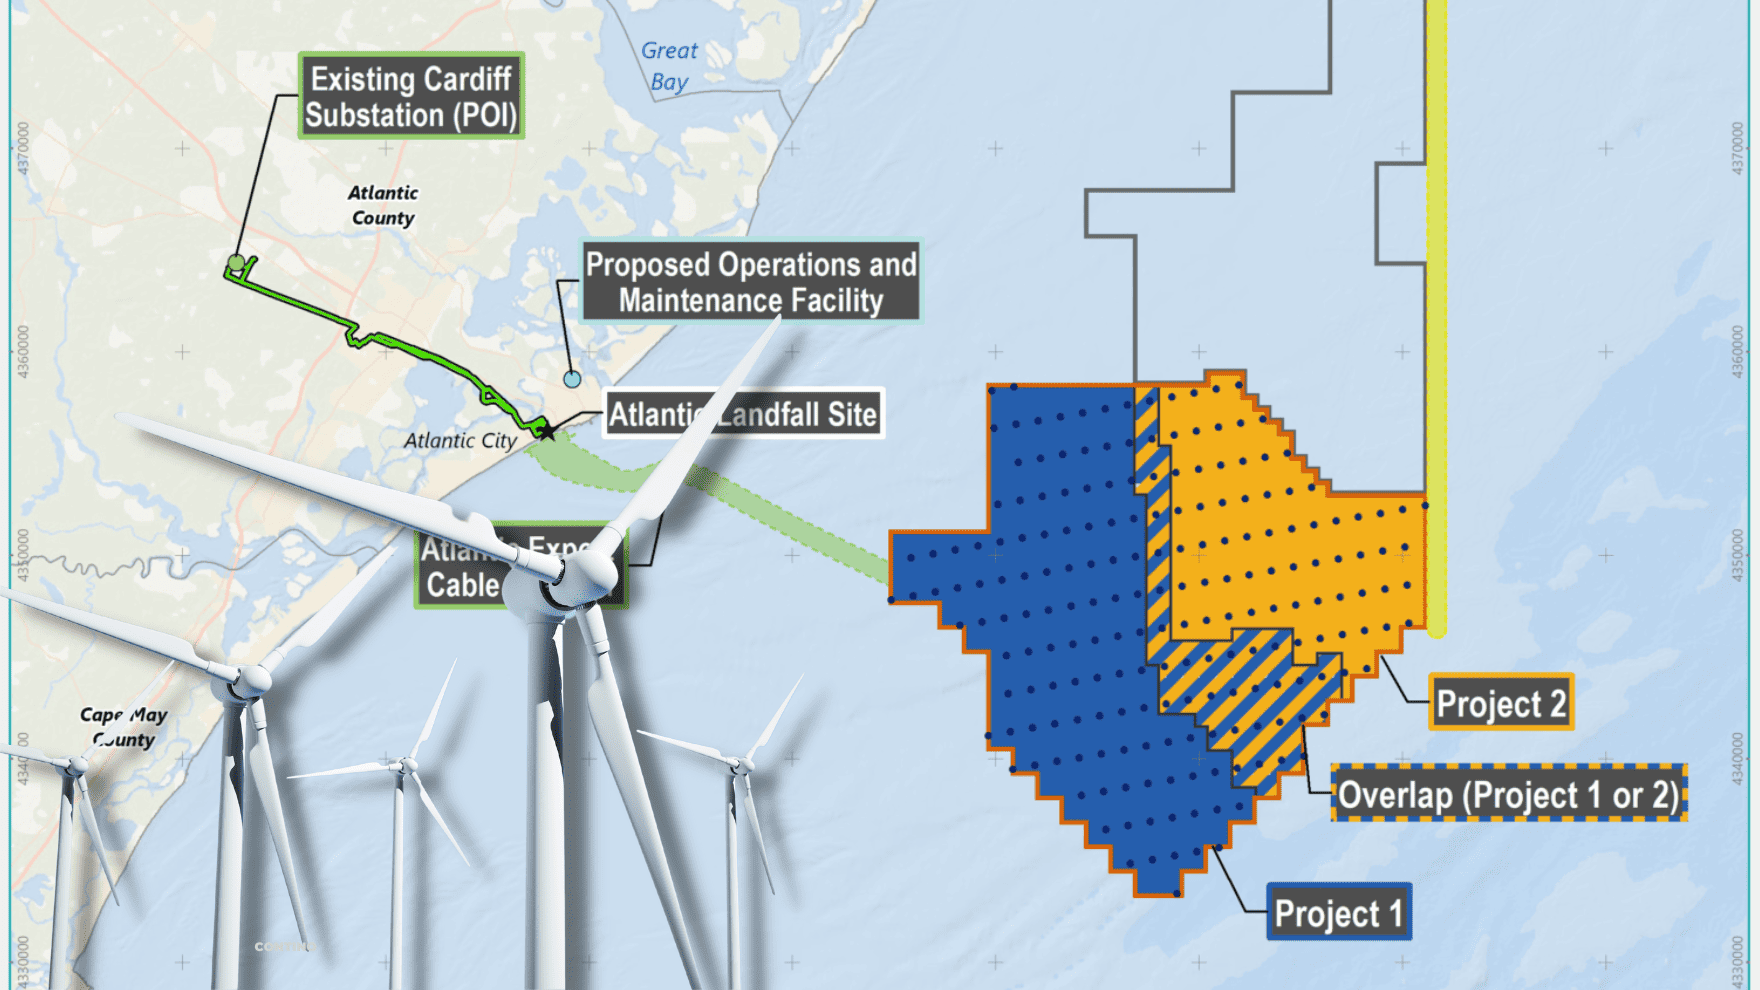 Atlantic Shores Offshore Wind Submits Project in New Jersey